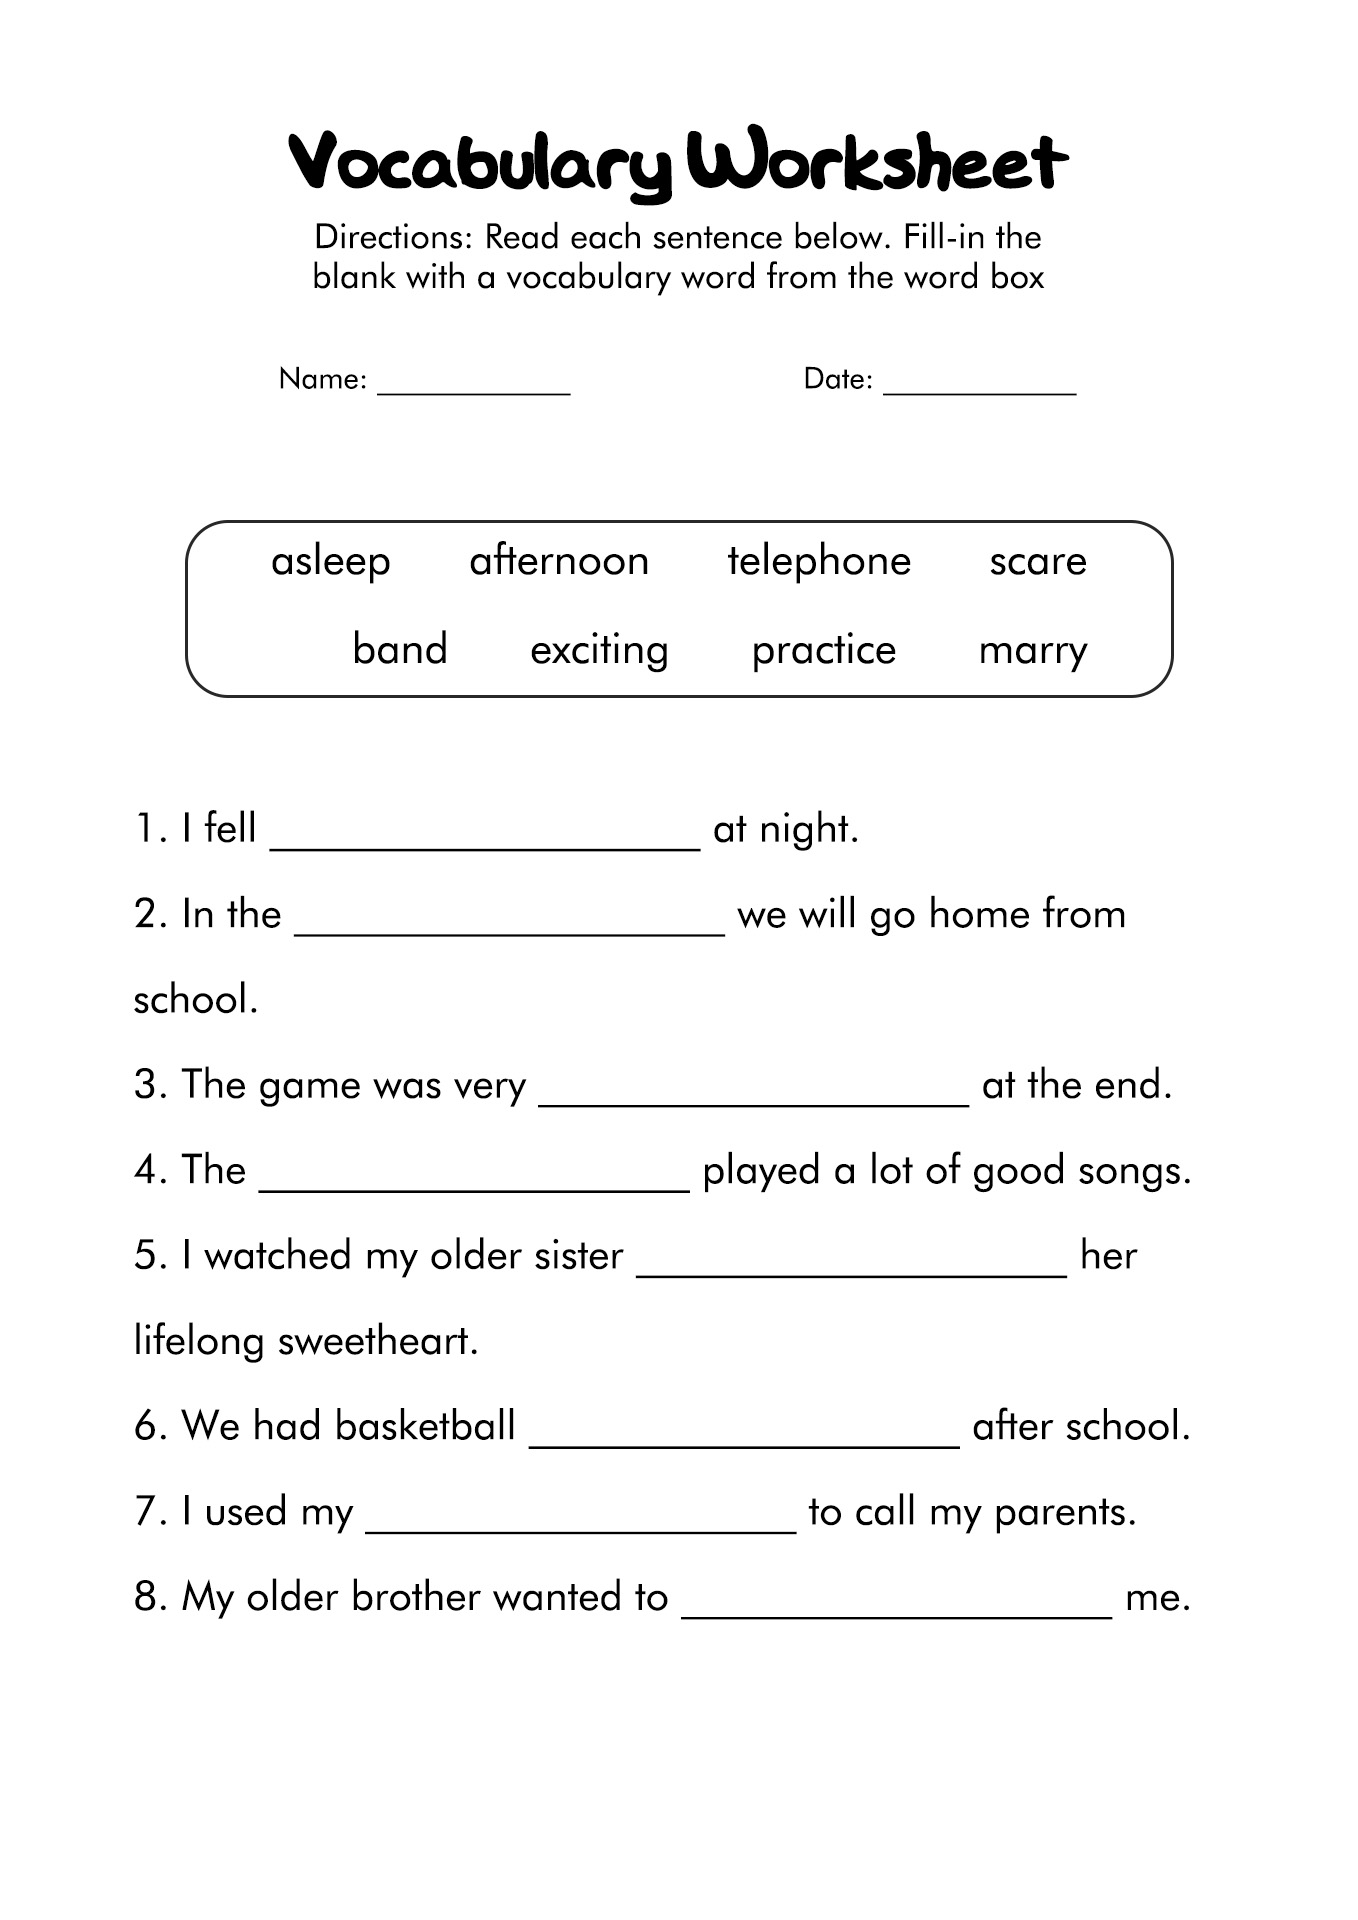 17-best-images-of-7th-grade-vocabulary-worksheets-7th-grade